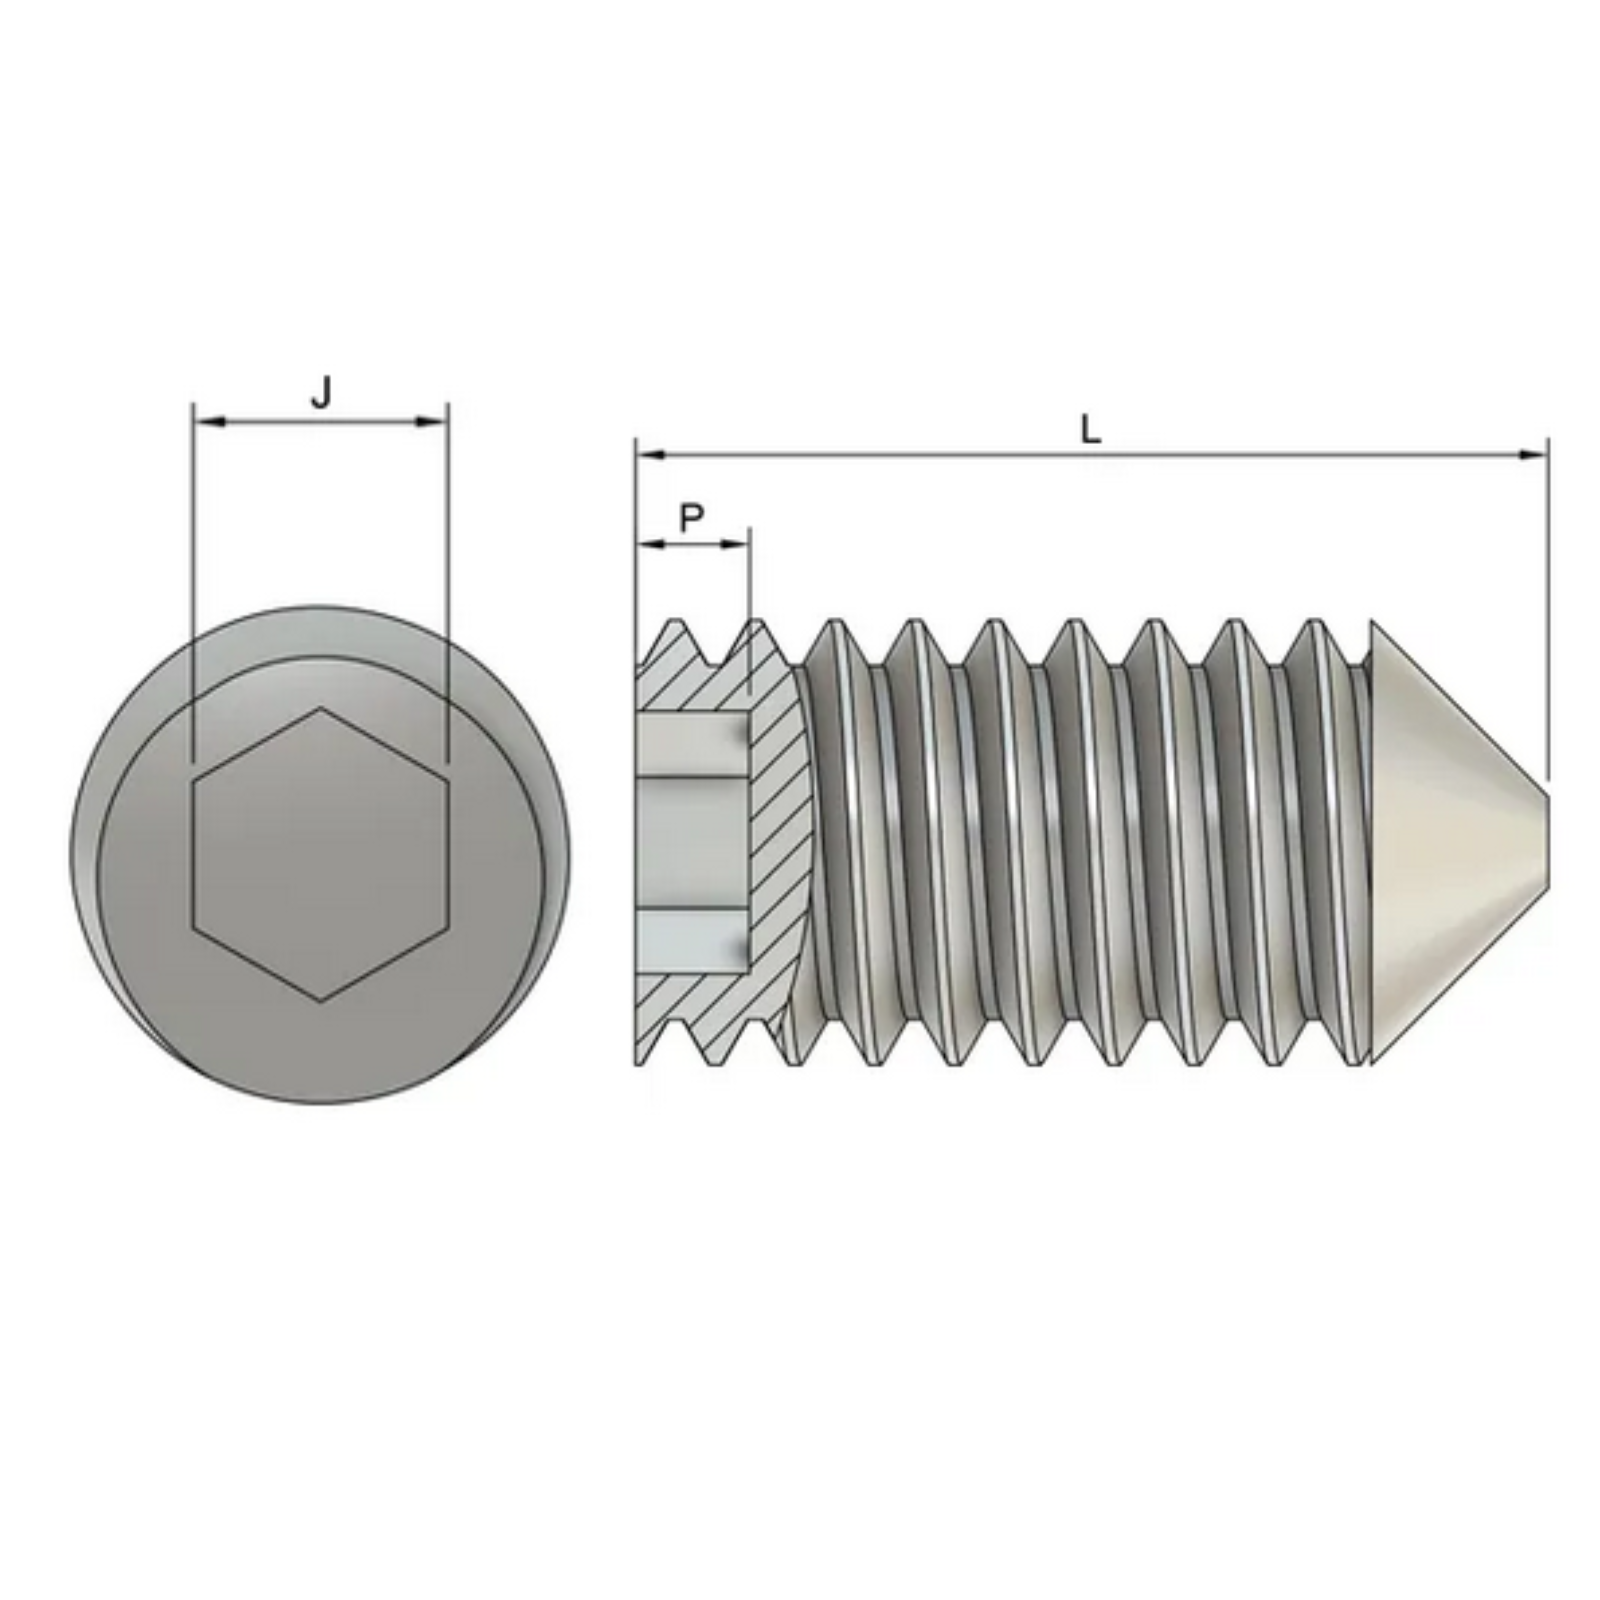 M6 Cone Point Set / Grub Screws (DIN 914) - Stainless Steel (A2)